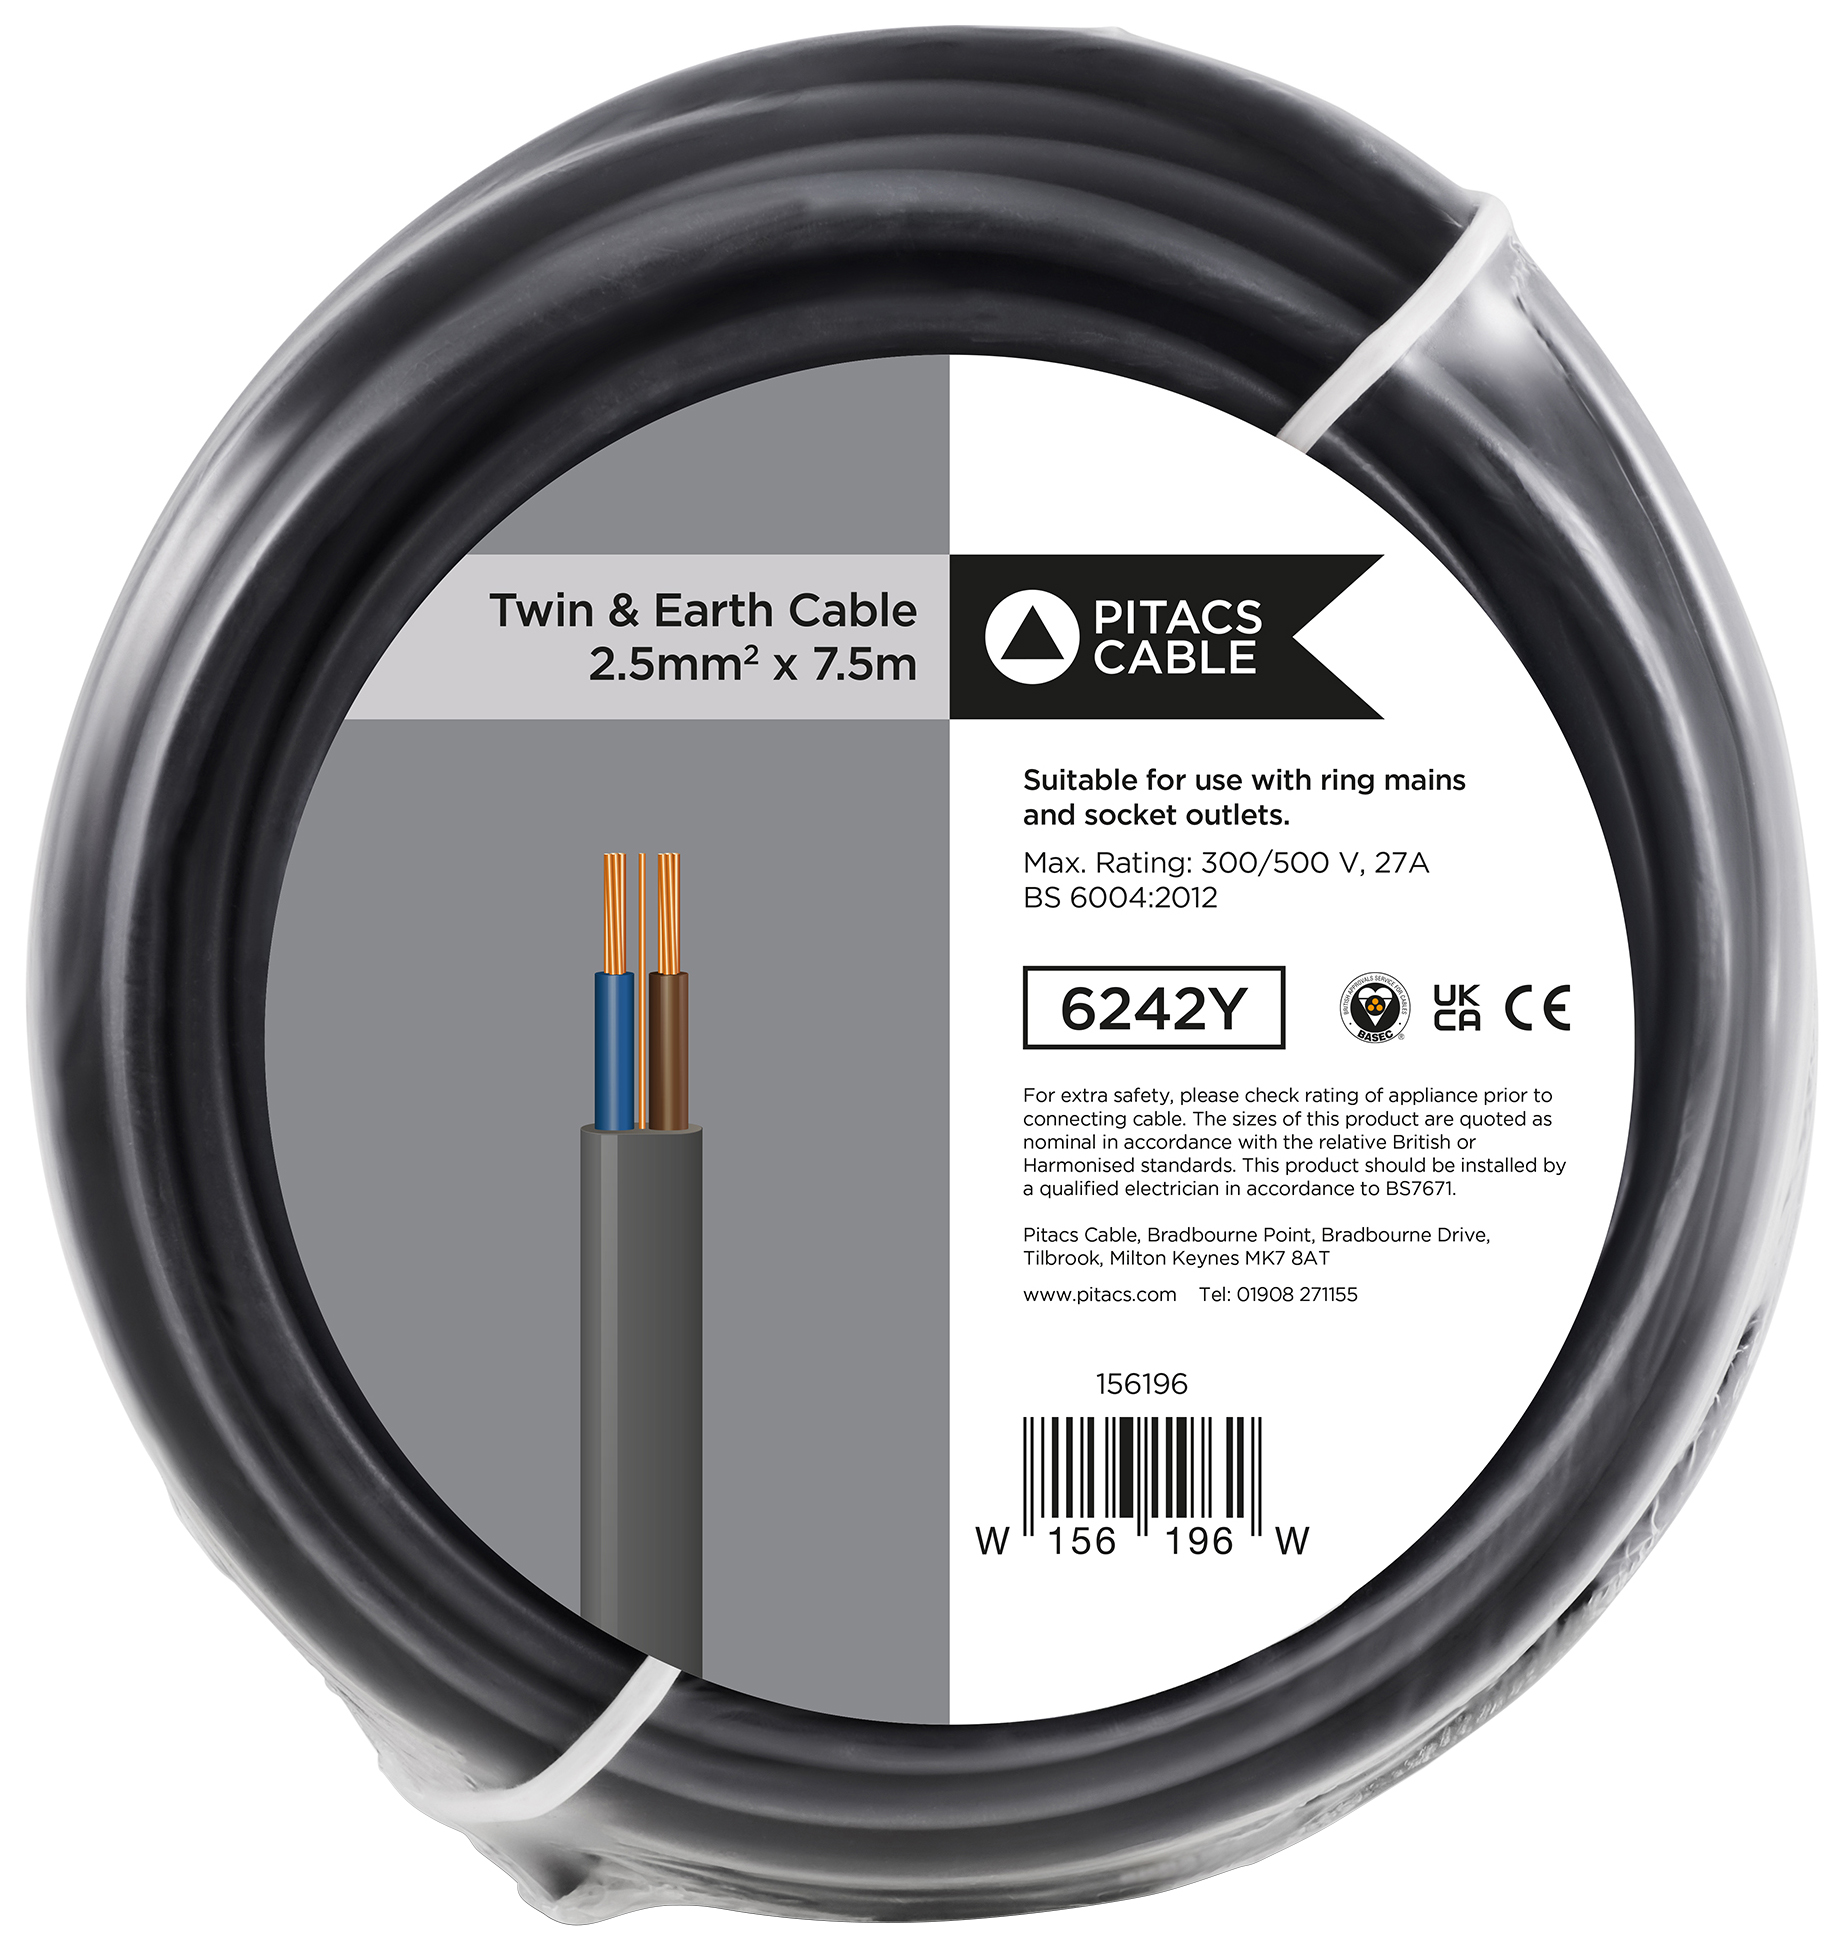 Twin & Earth Cable - 2.5mm2 x 7.5m